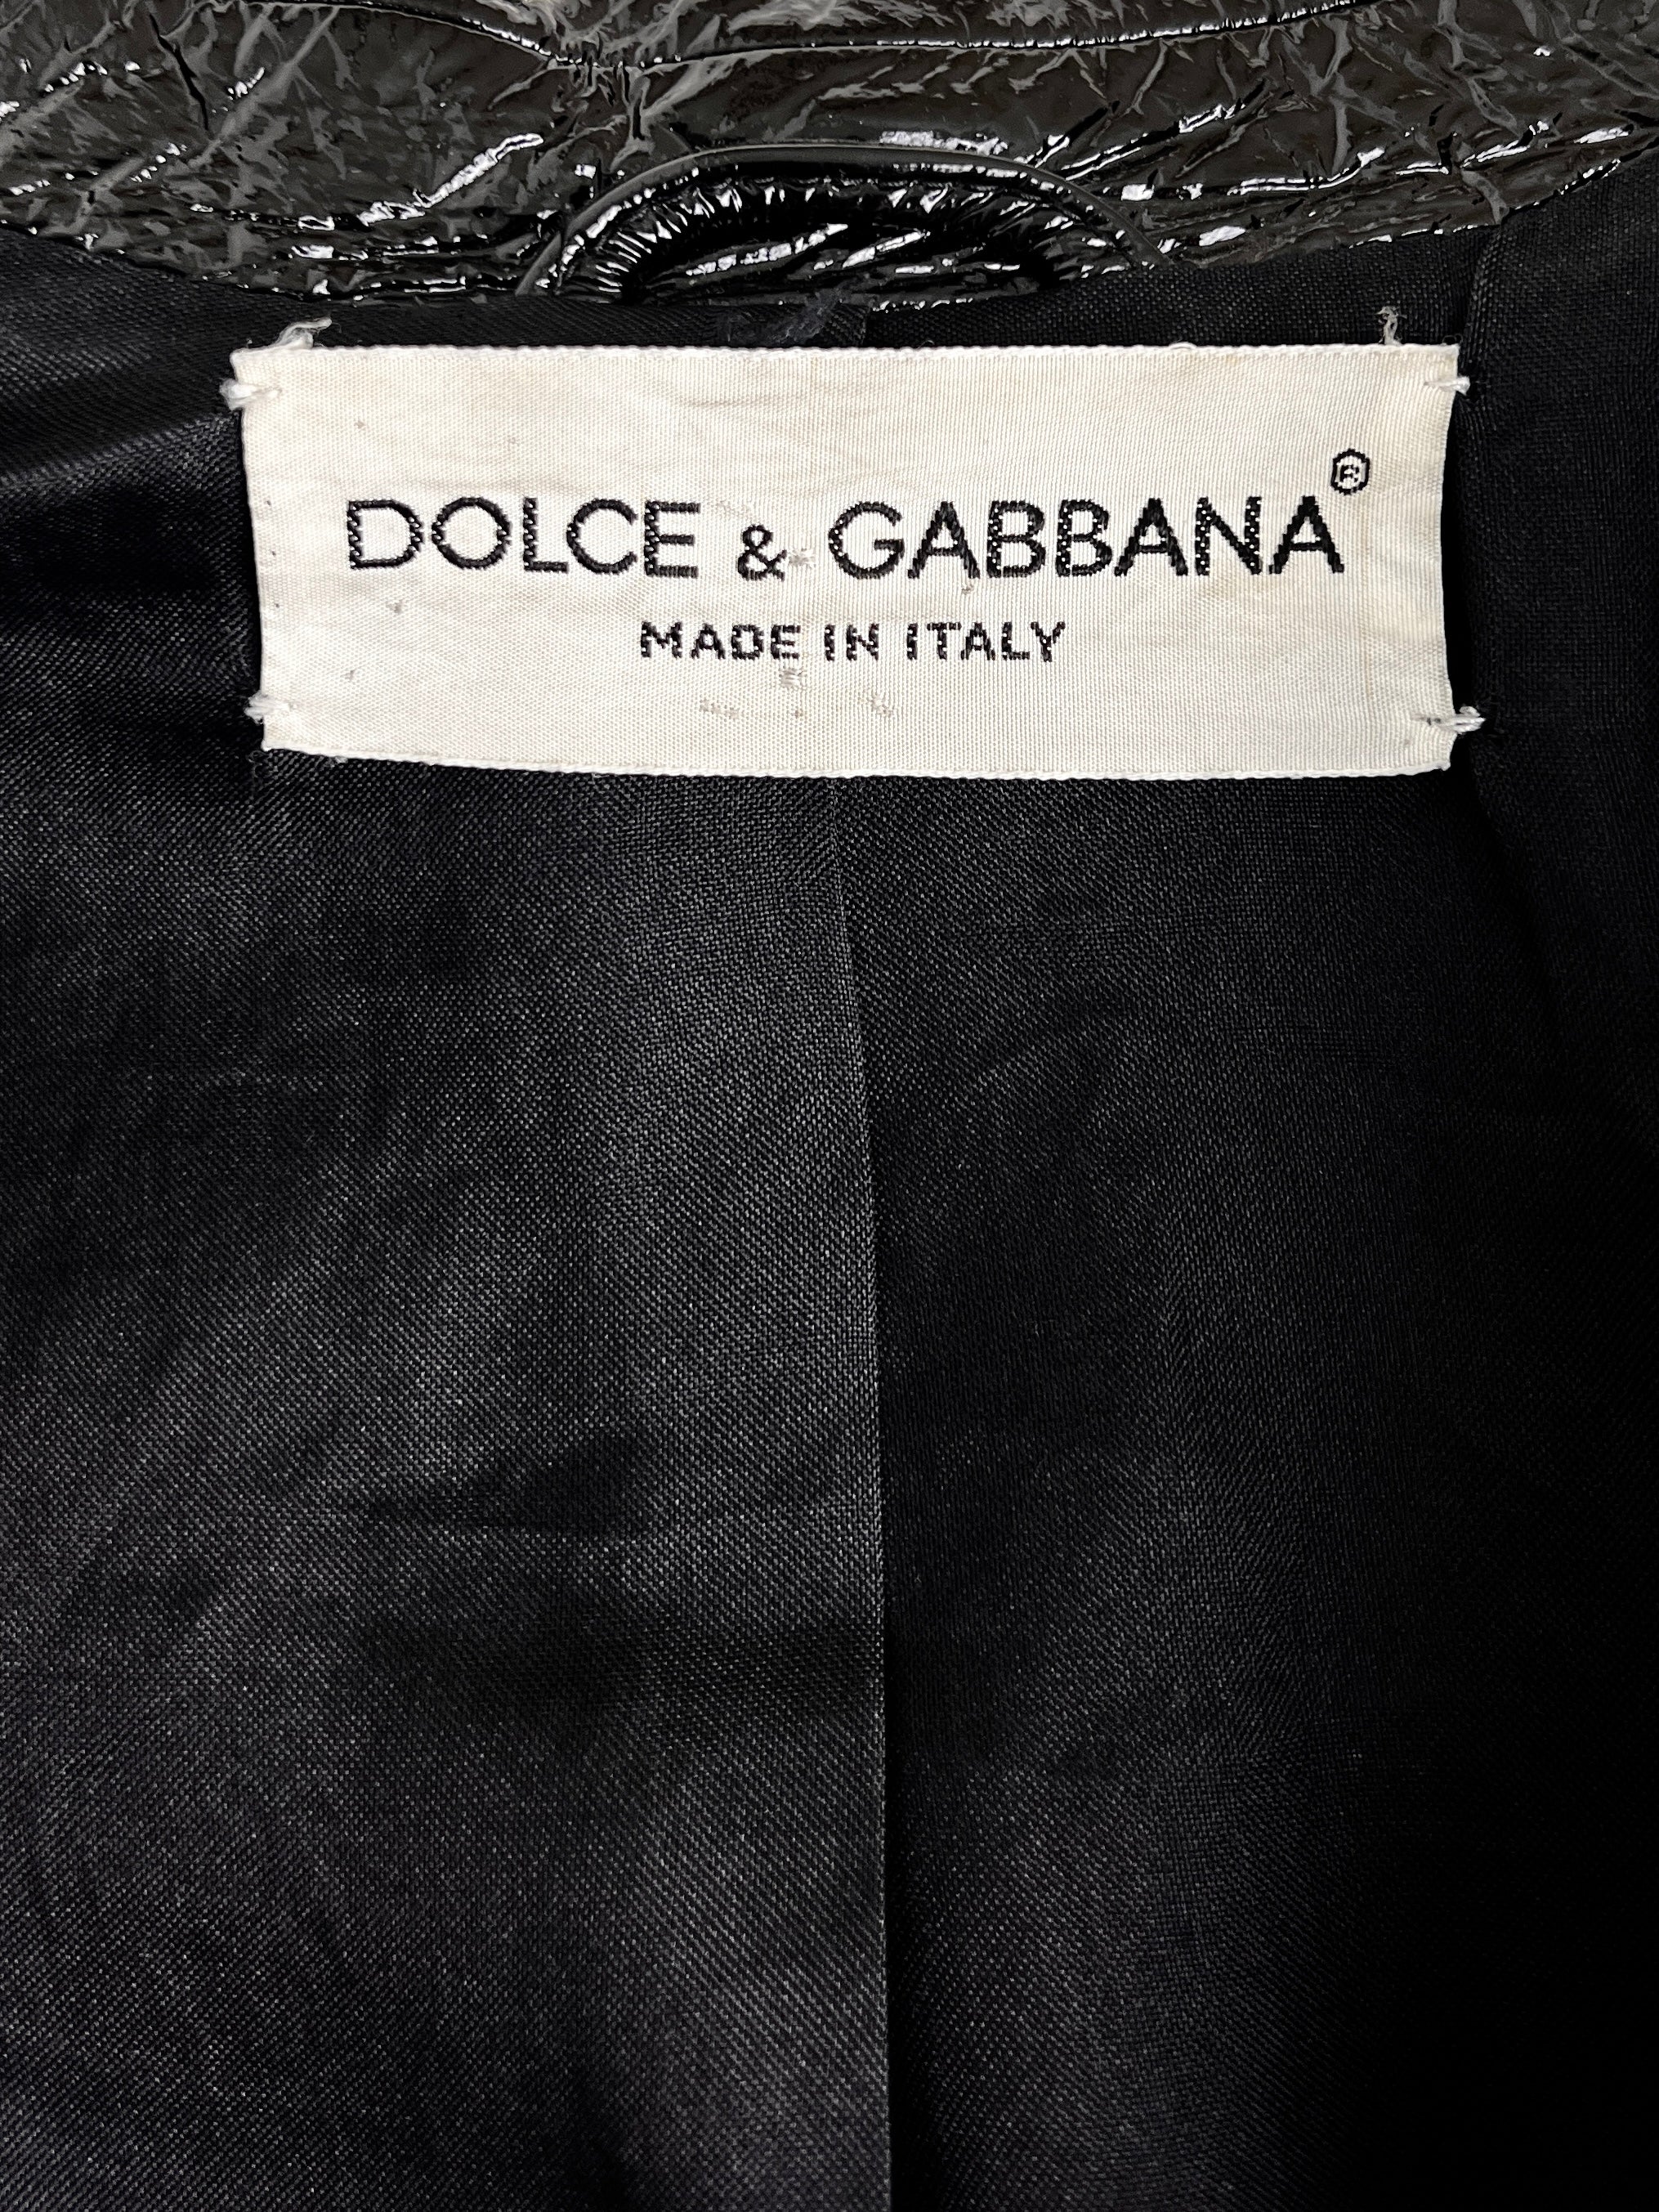 Dolce & Gabbana Spring 1991 Patent Leather Coat